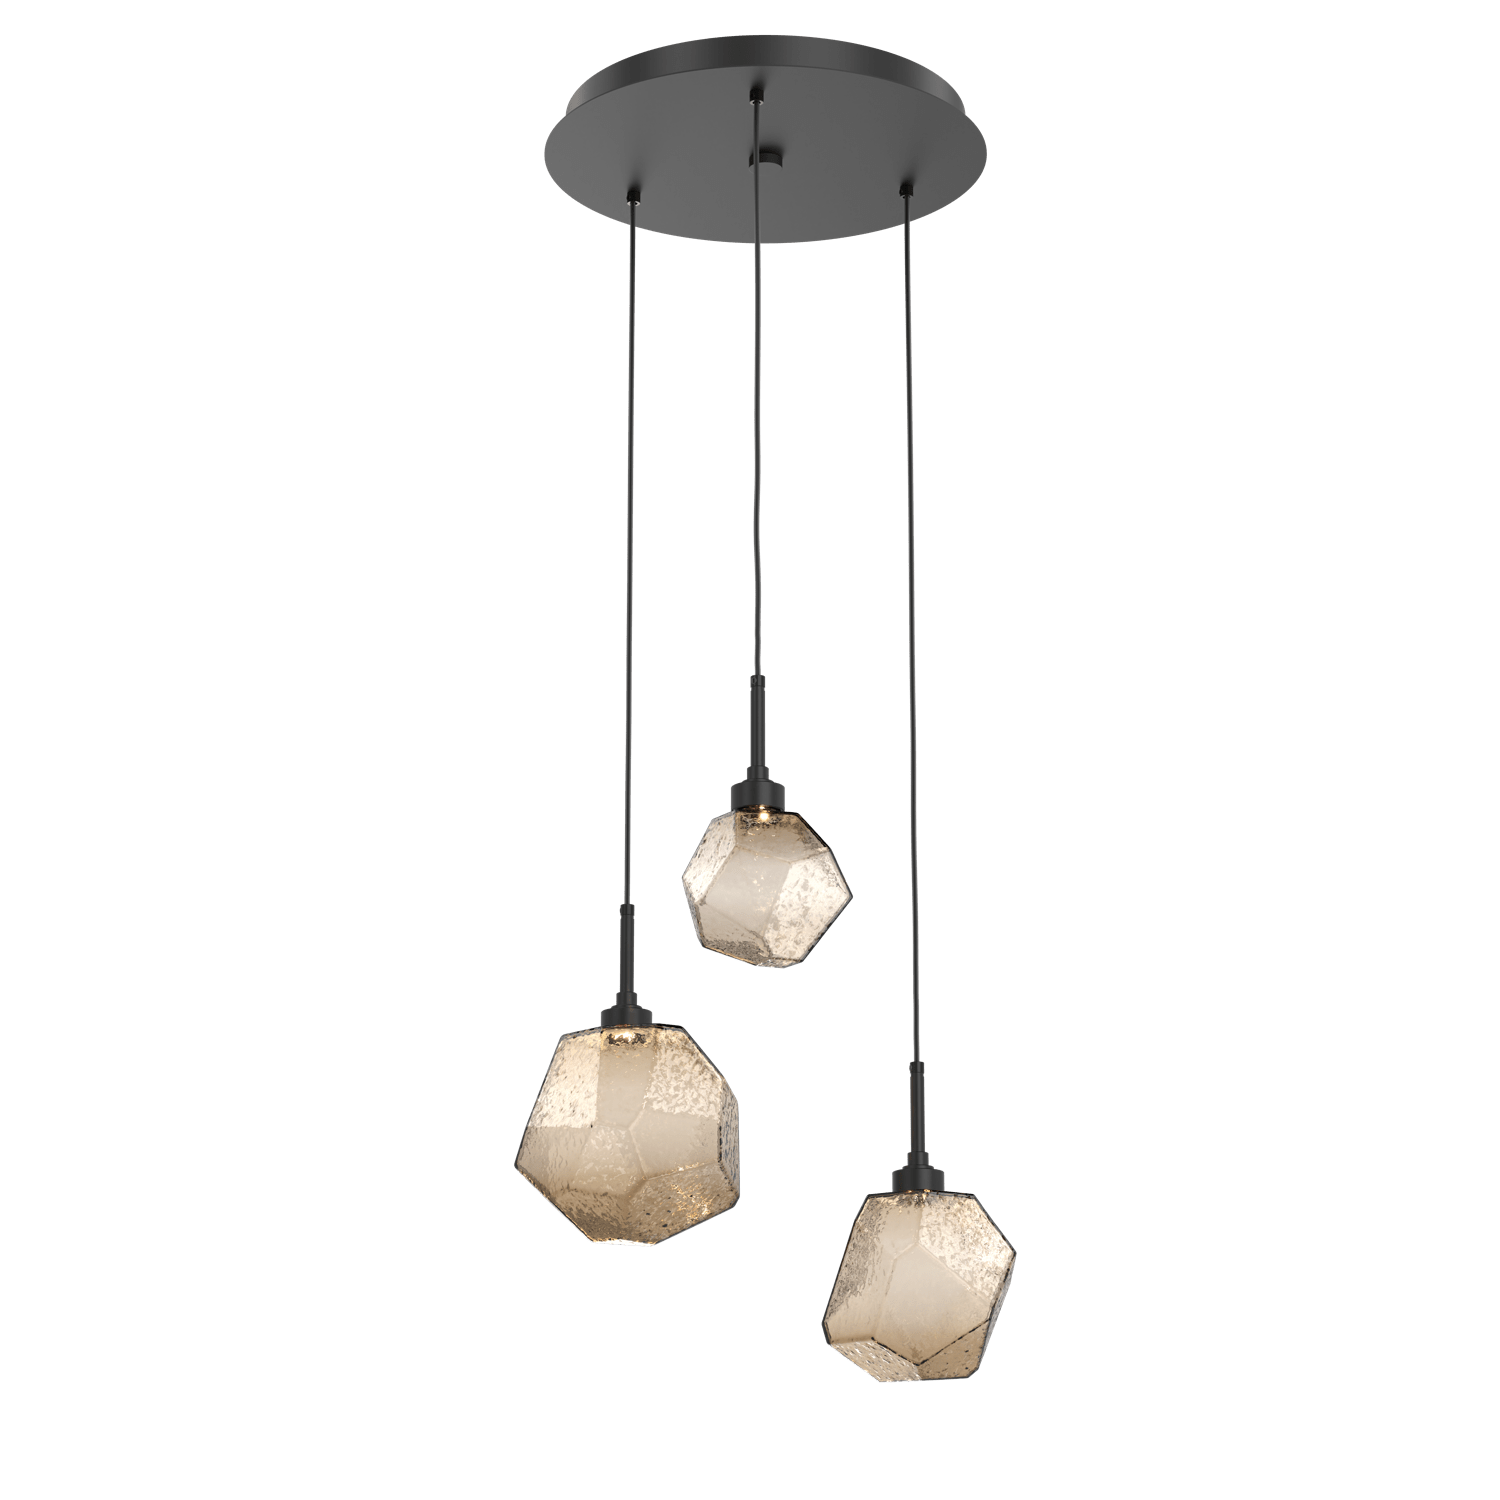 CHB0039-03-MB-B-Hammerton-Studio-Gem-3-light-round-pendant-chandelier-with-matte-black-finish-and-bronze-blown-glass-shades-and-LED-lamping